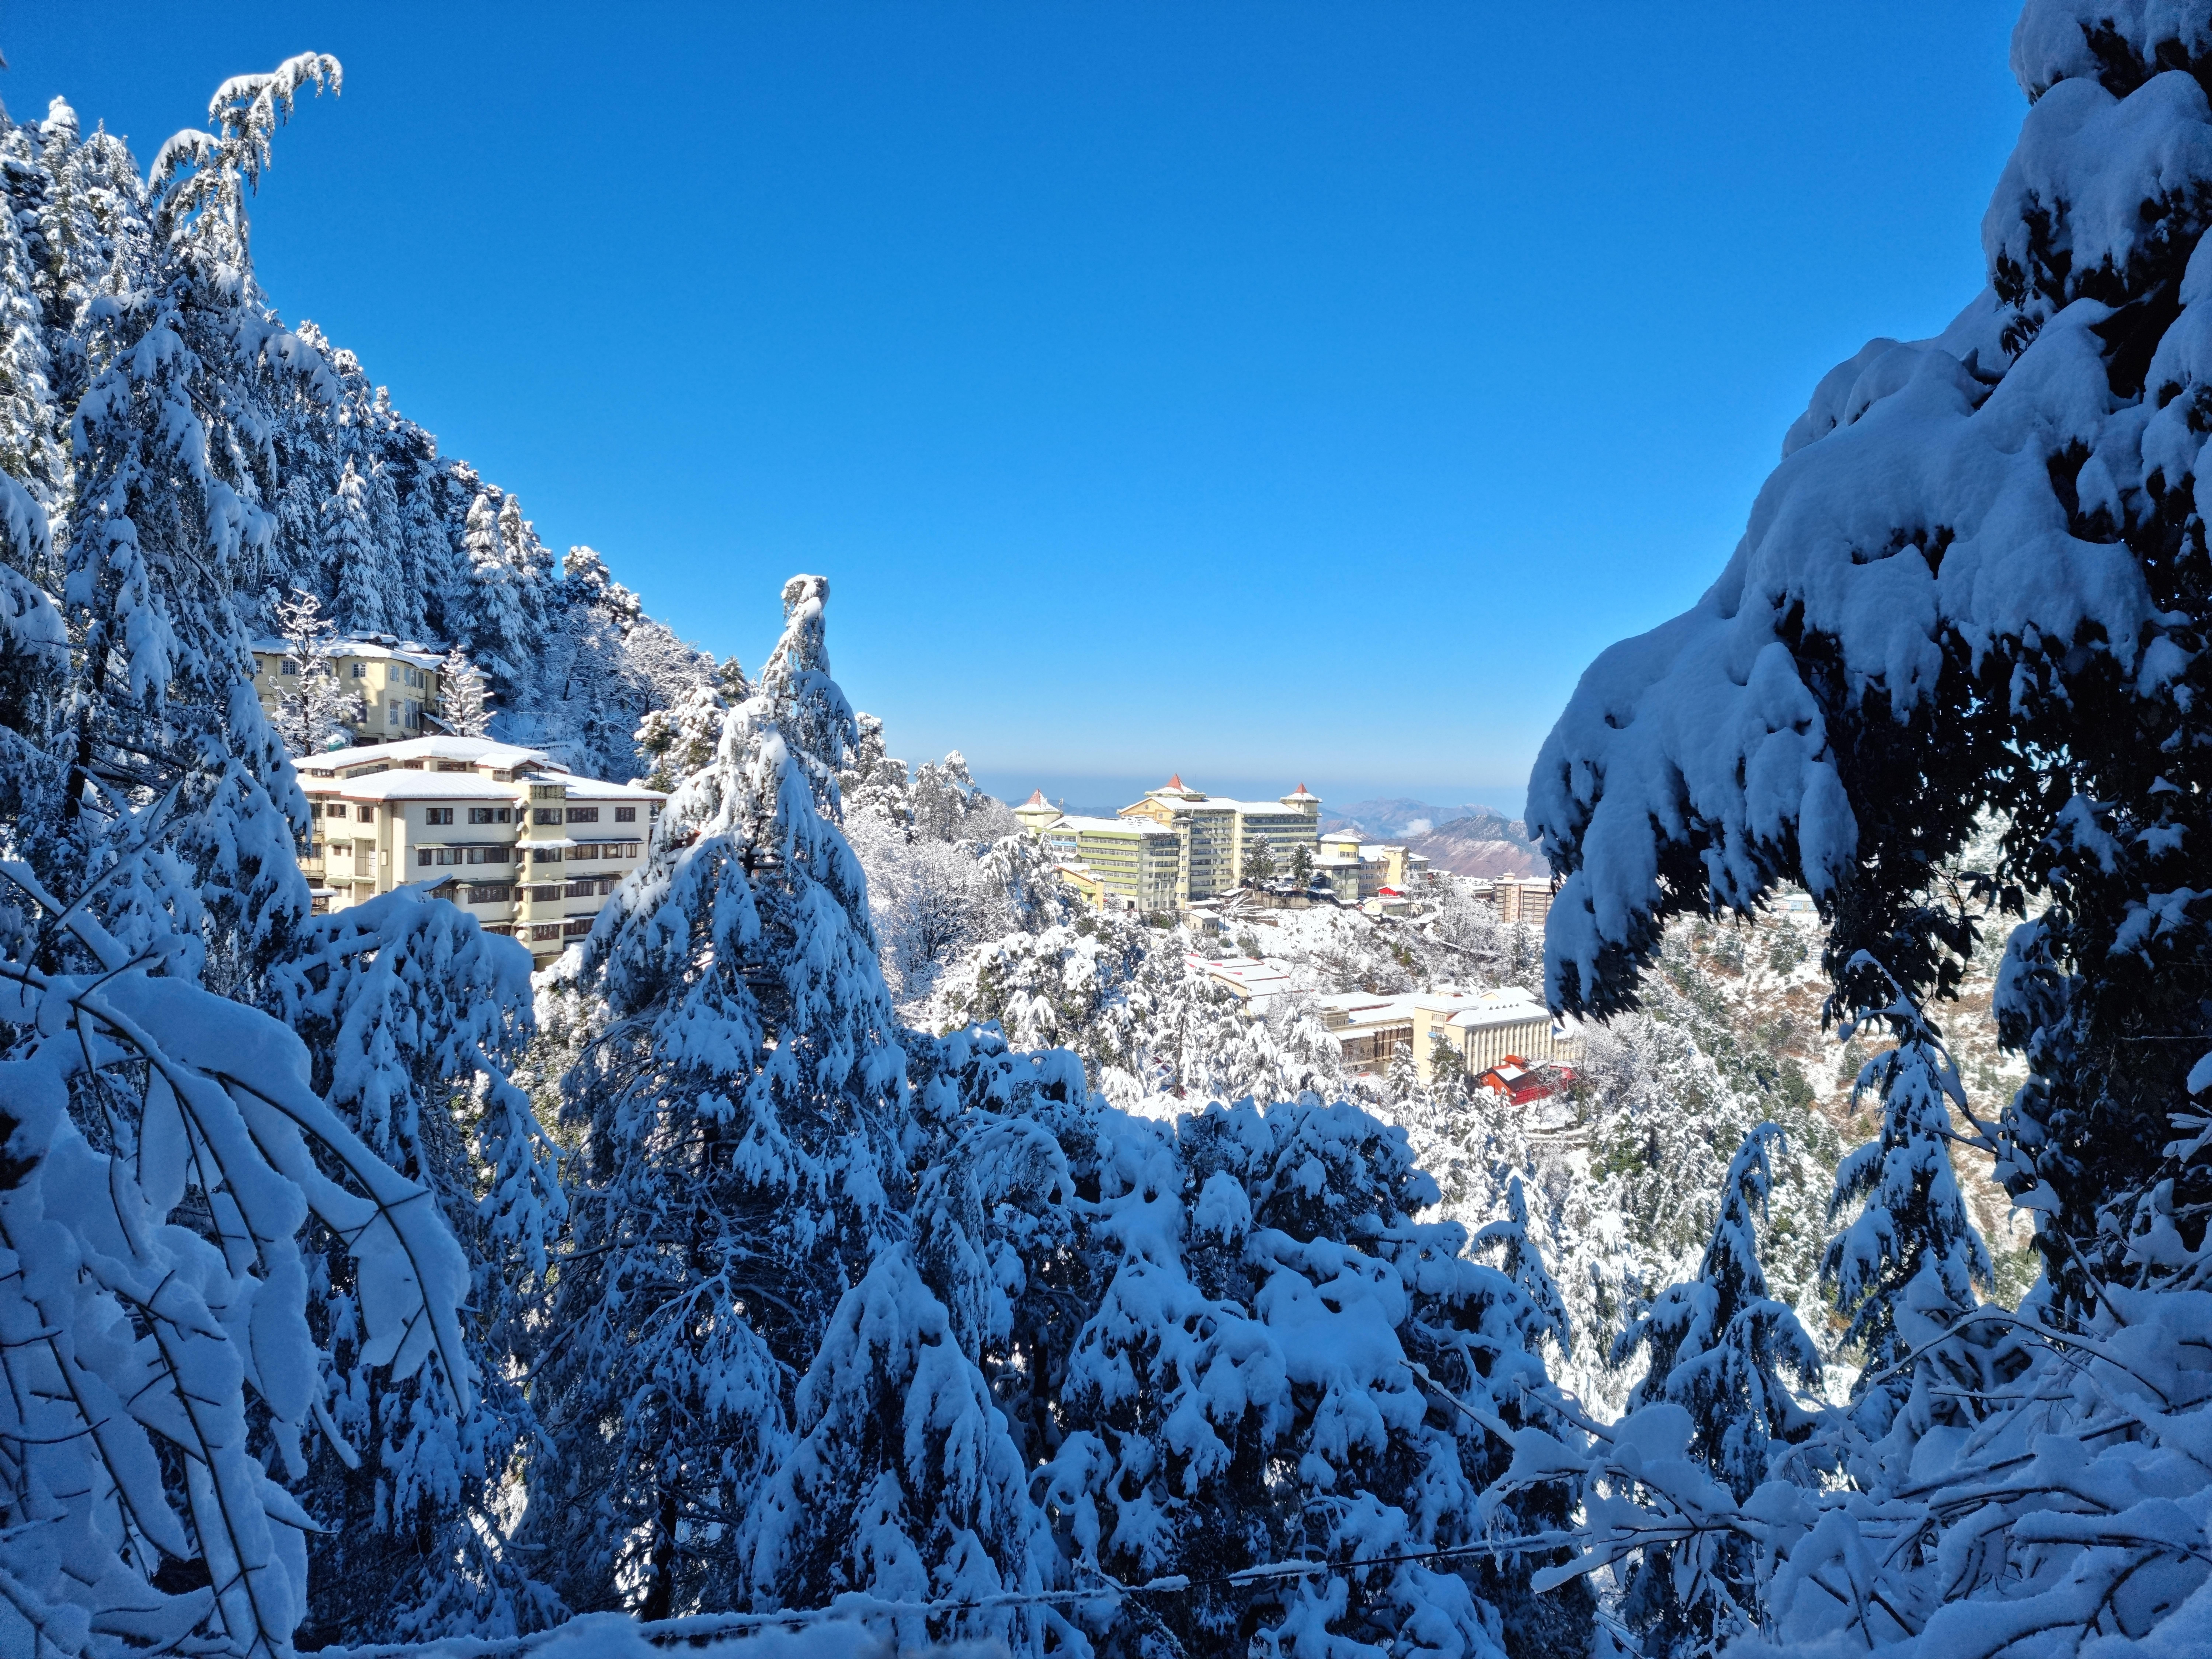 Shimla Packages from Chandigarh | Get Upto 50% Off